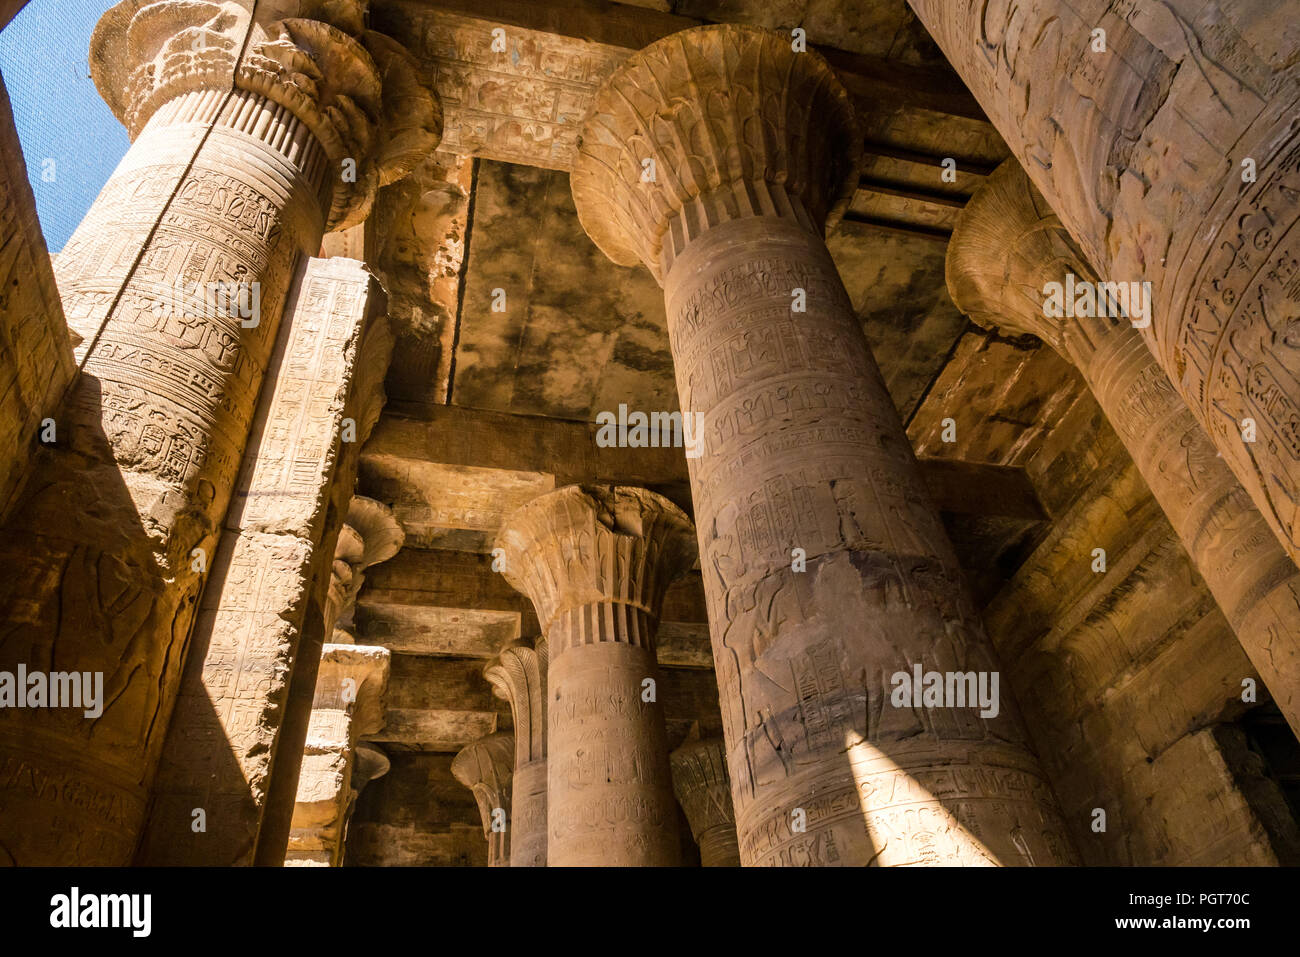 Looking up at carved floral capitals of stone columns in hypostyle hall with hieroglyphs, Edfu Temple, Edfu. Egypt, Africa Stock Photo